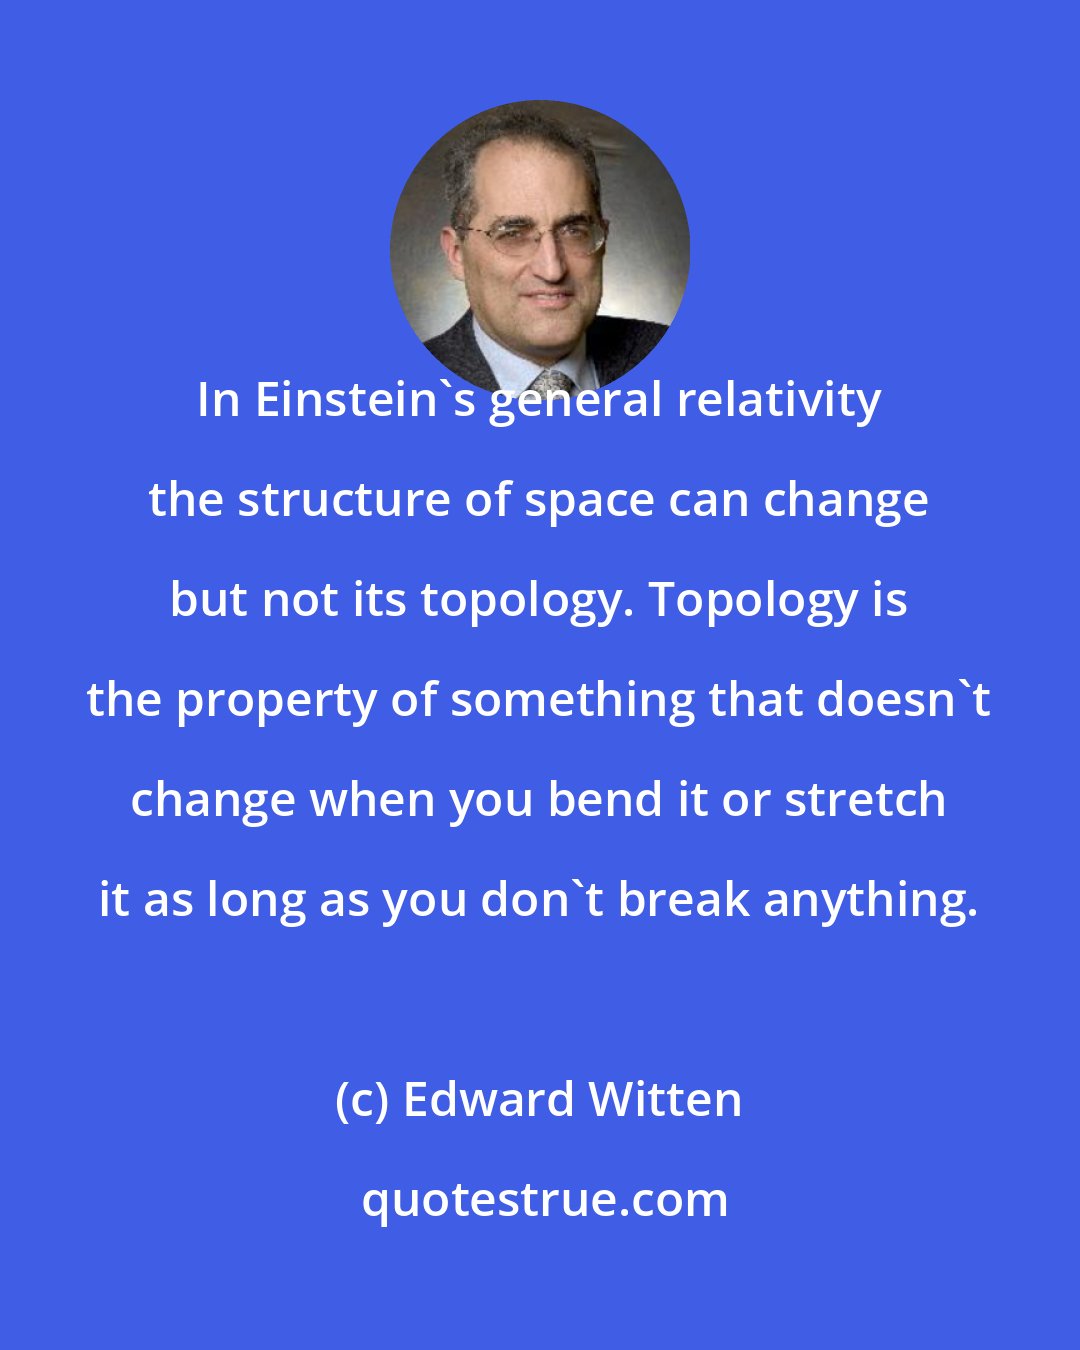 Edward Witten: In Einstein's general relativity the structure of space can change but not its topology. Topology is the property of something that doesn't change when you bend it or stretch it as long as you don't break anything.